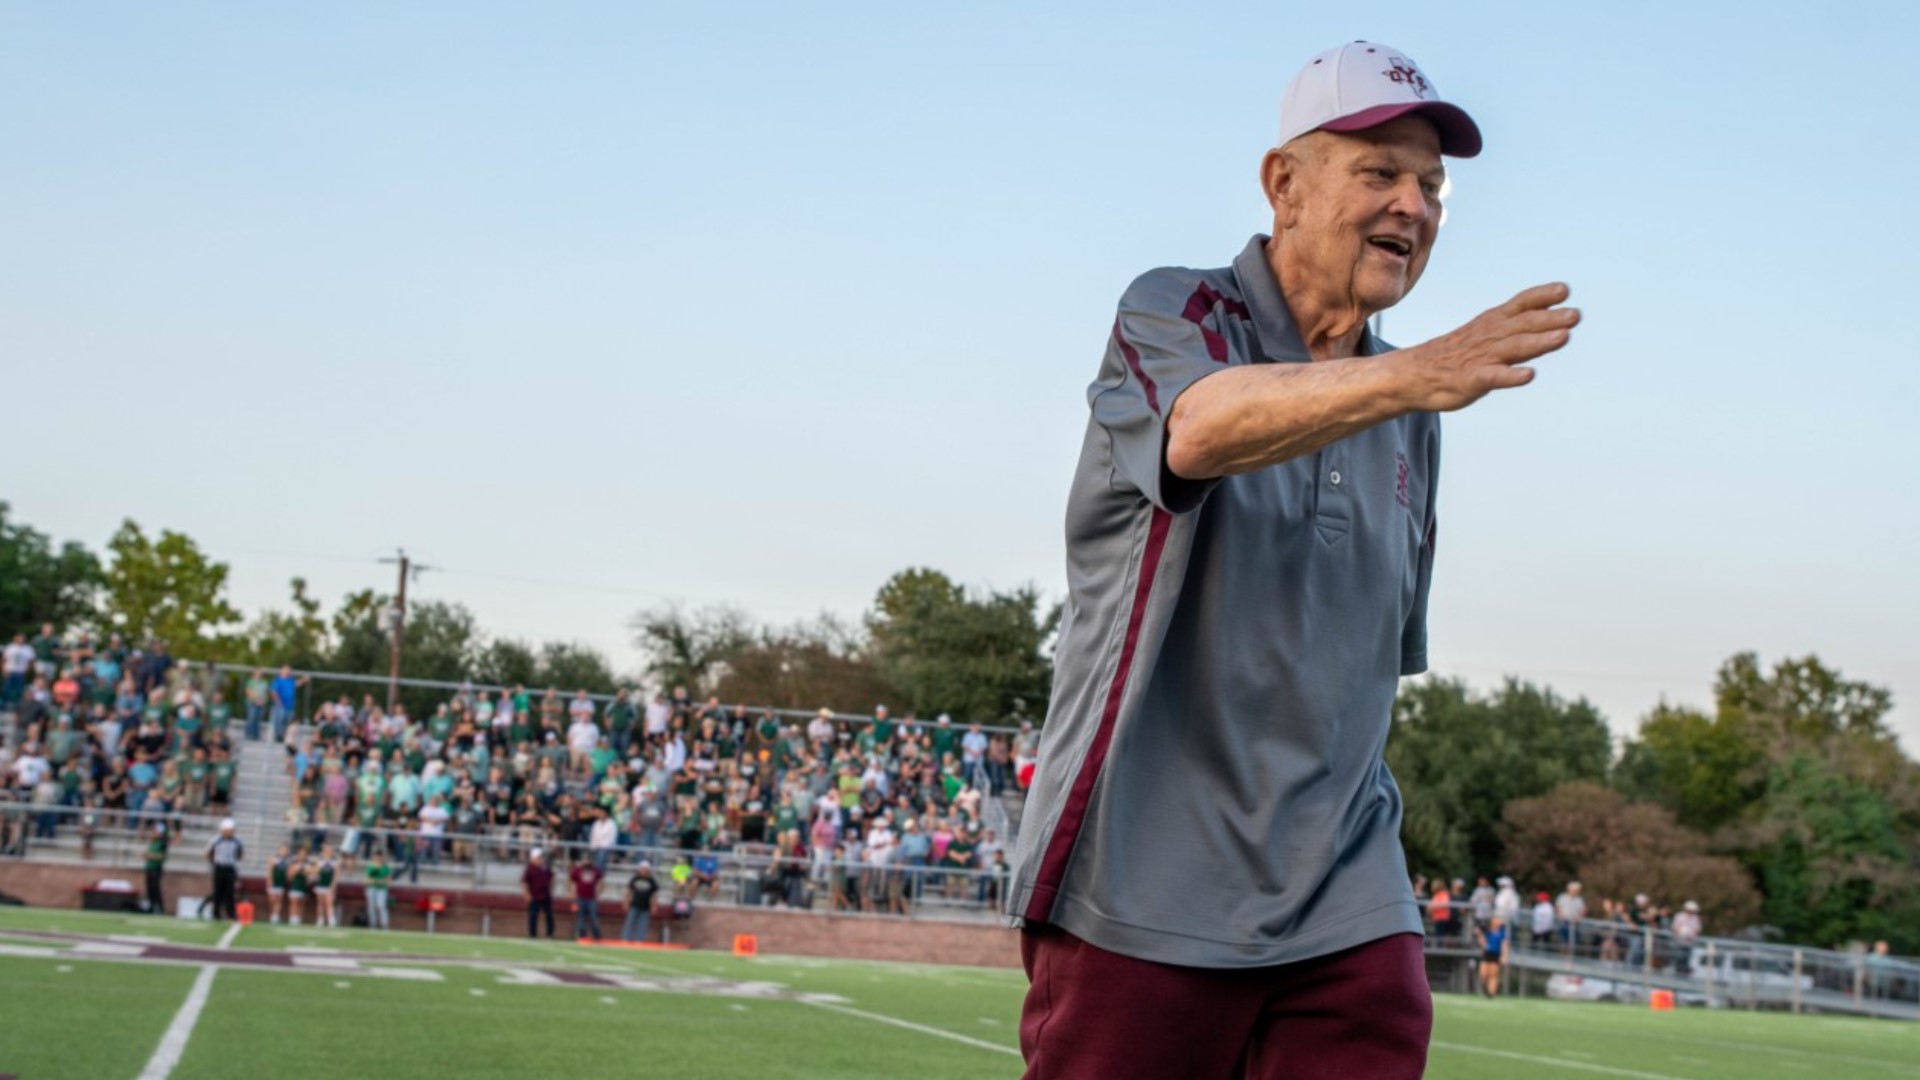 Through his quick-wit and tireless record-keeping, Bertie Shuemate has been telling the story of C.H. Yoe athletics for 50 years. Now, he's telling his own story.